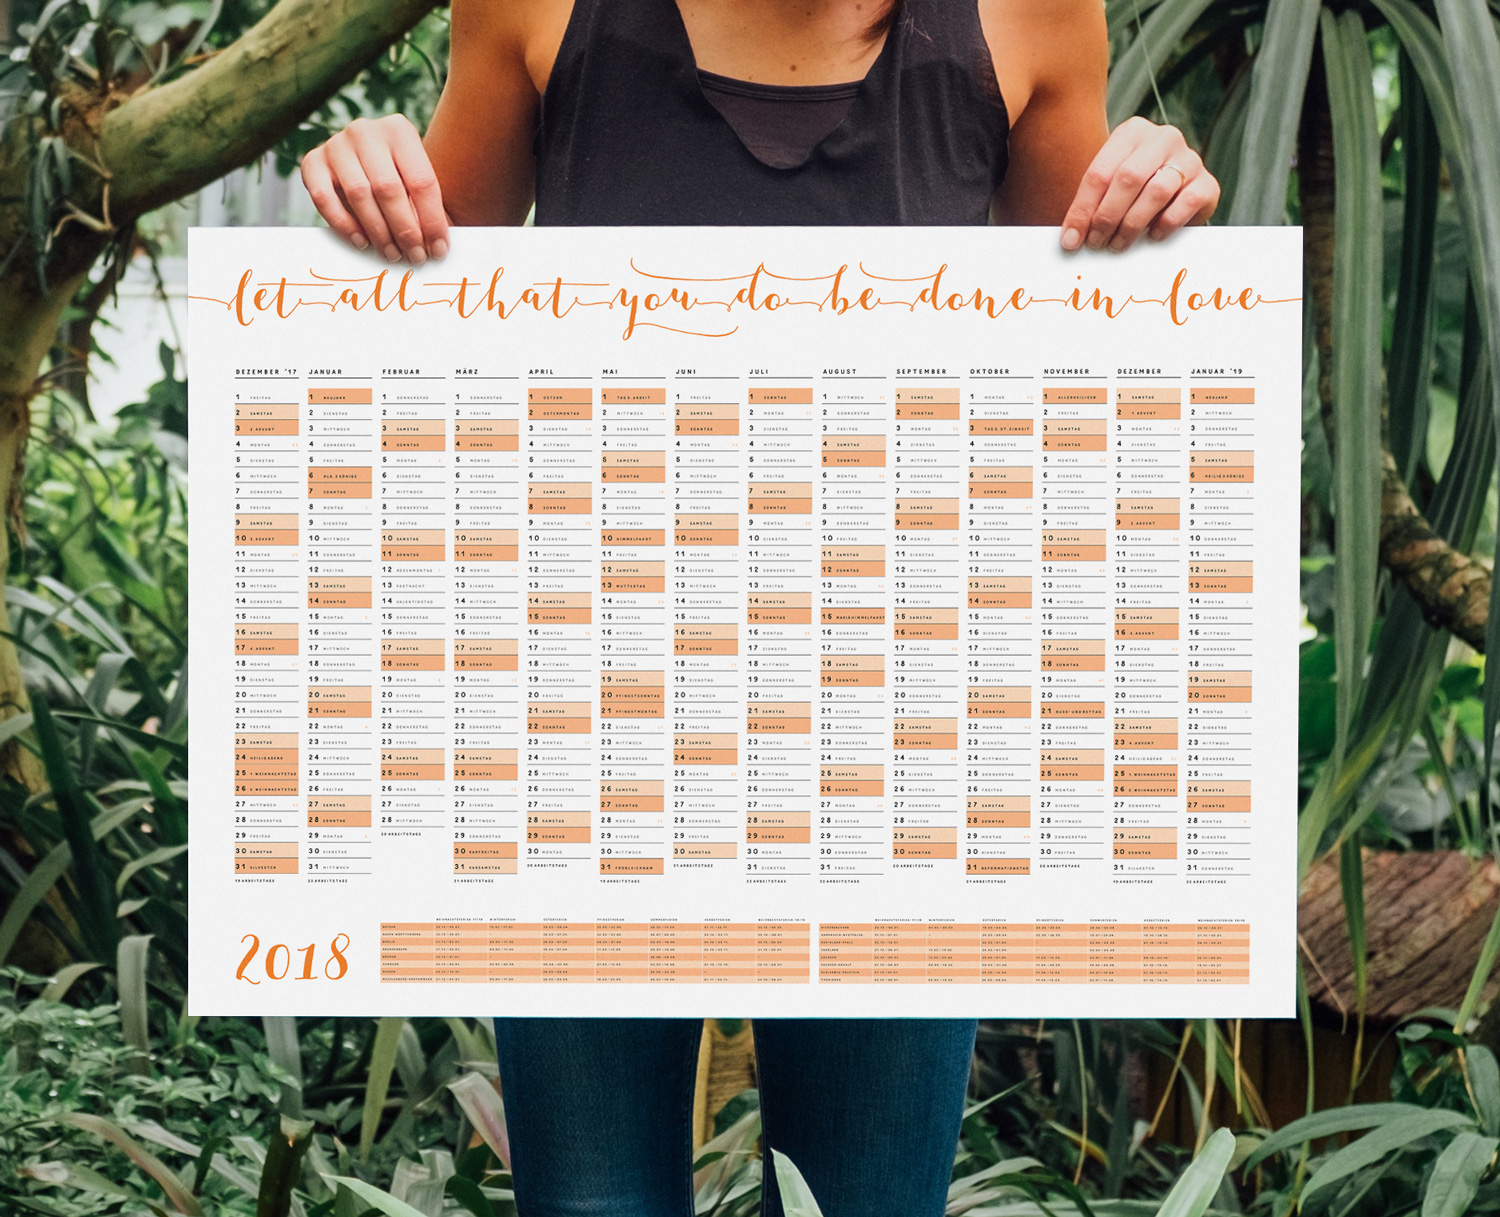 All-year wall calendar in German language. It was set in two colours in Mila Script and Mila Sans and includes day digits and names, the German holidays and the number of working days per month. At the bottom is a table of German holidays, sorted by state